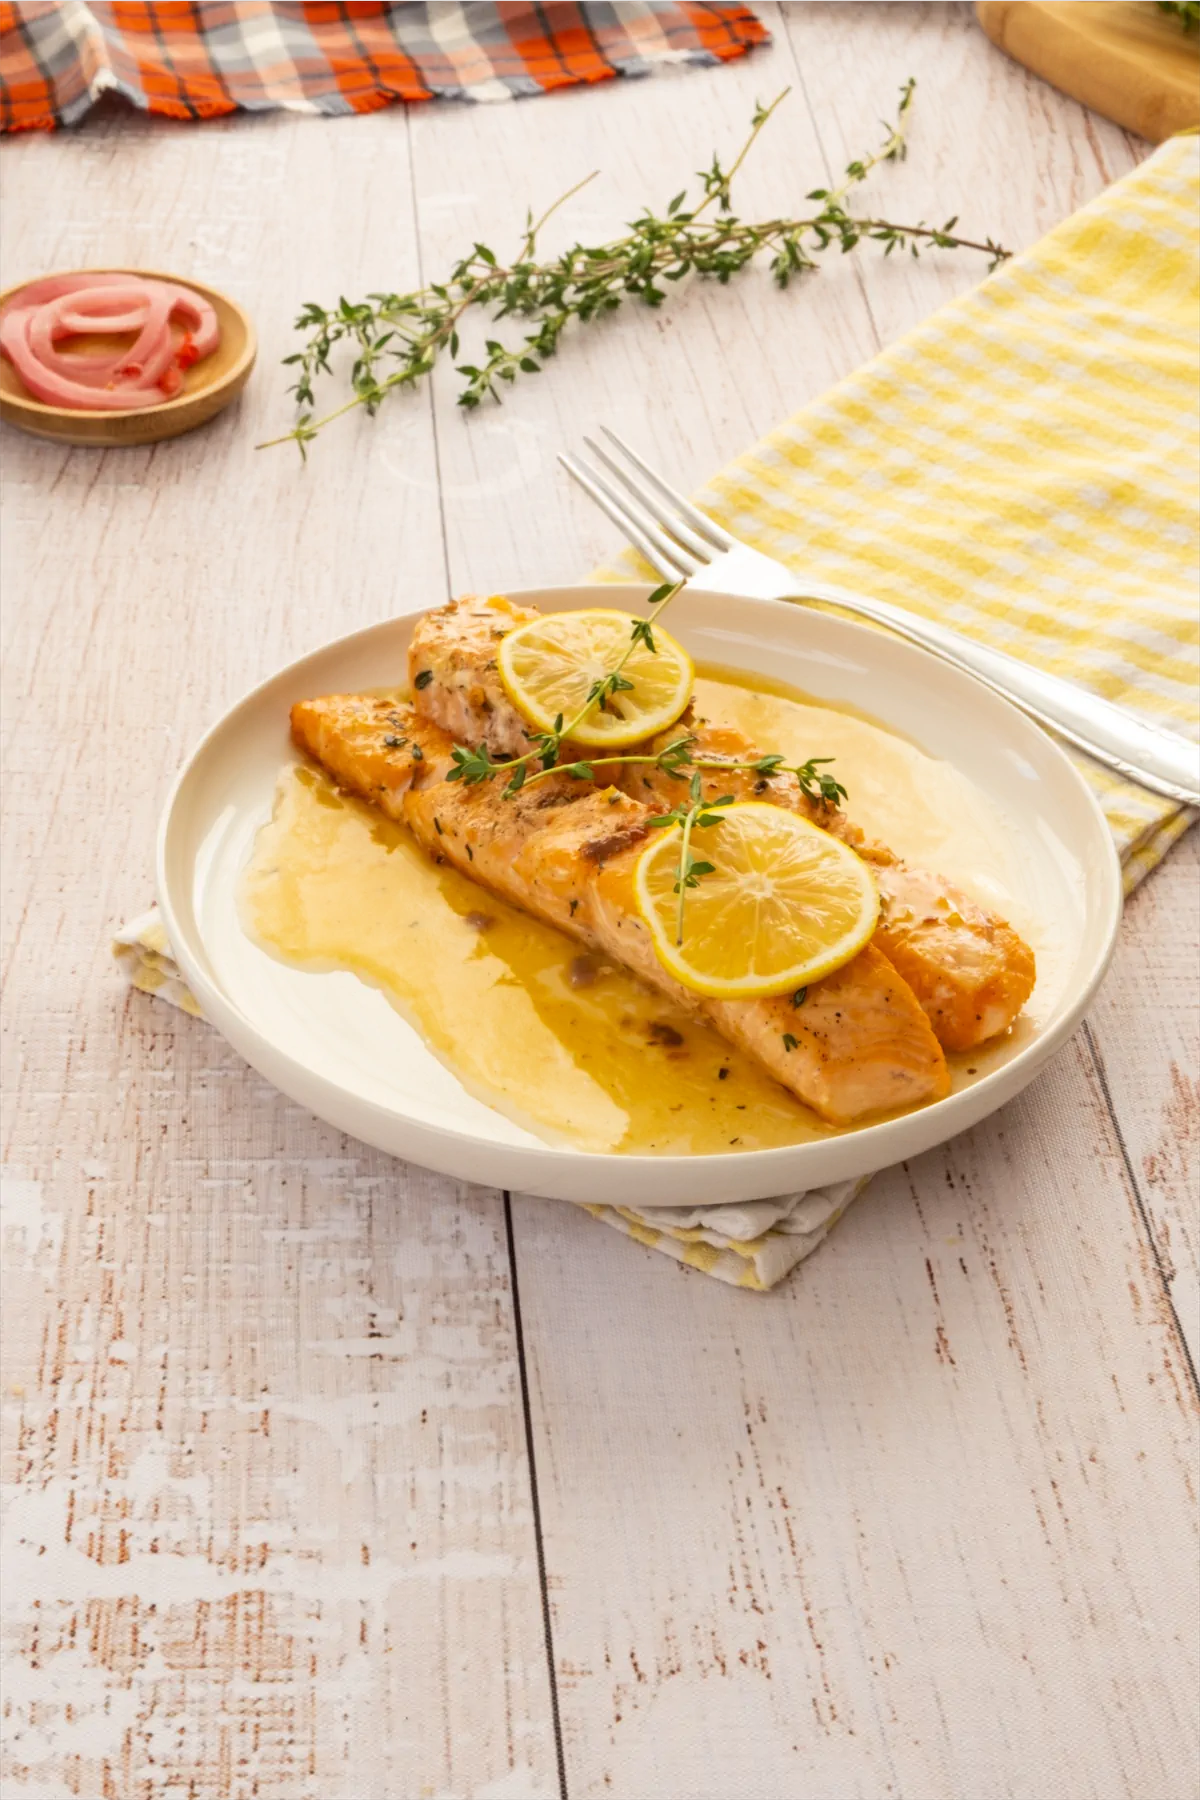 Salmon recipe with lemon butter sauce served on a plate.